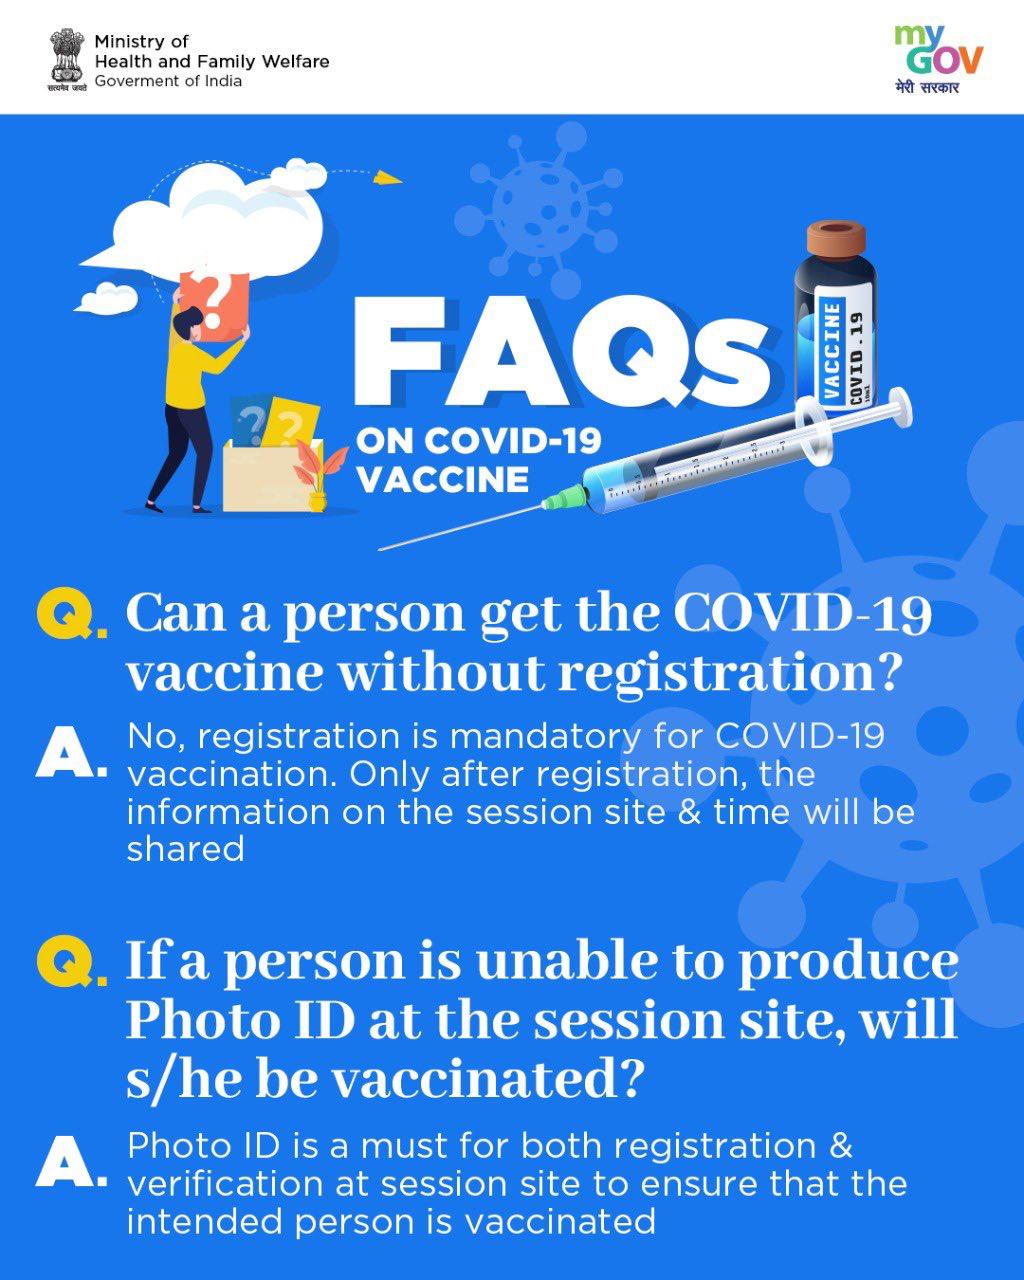 Frequently Asked Questions about COVID-19 Vaccination | In Pics